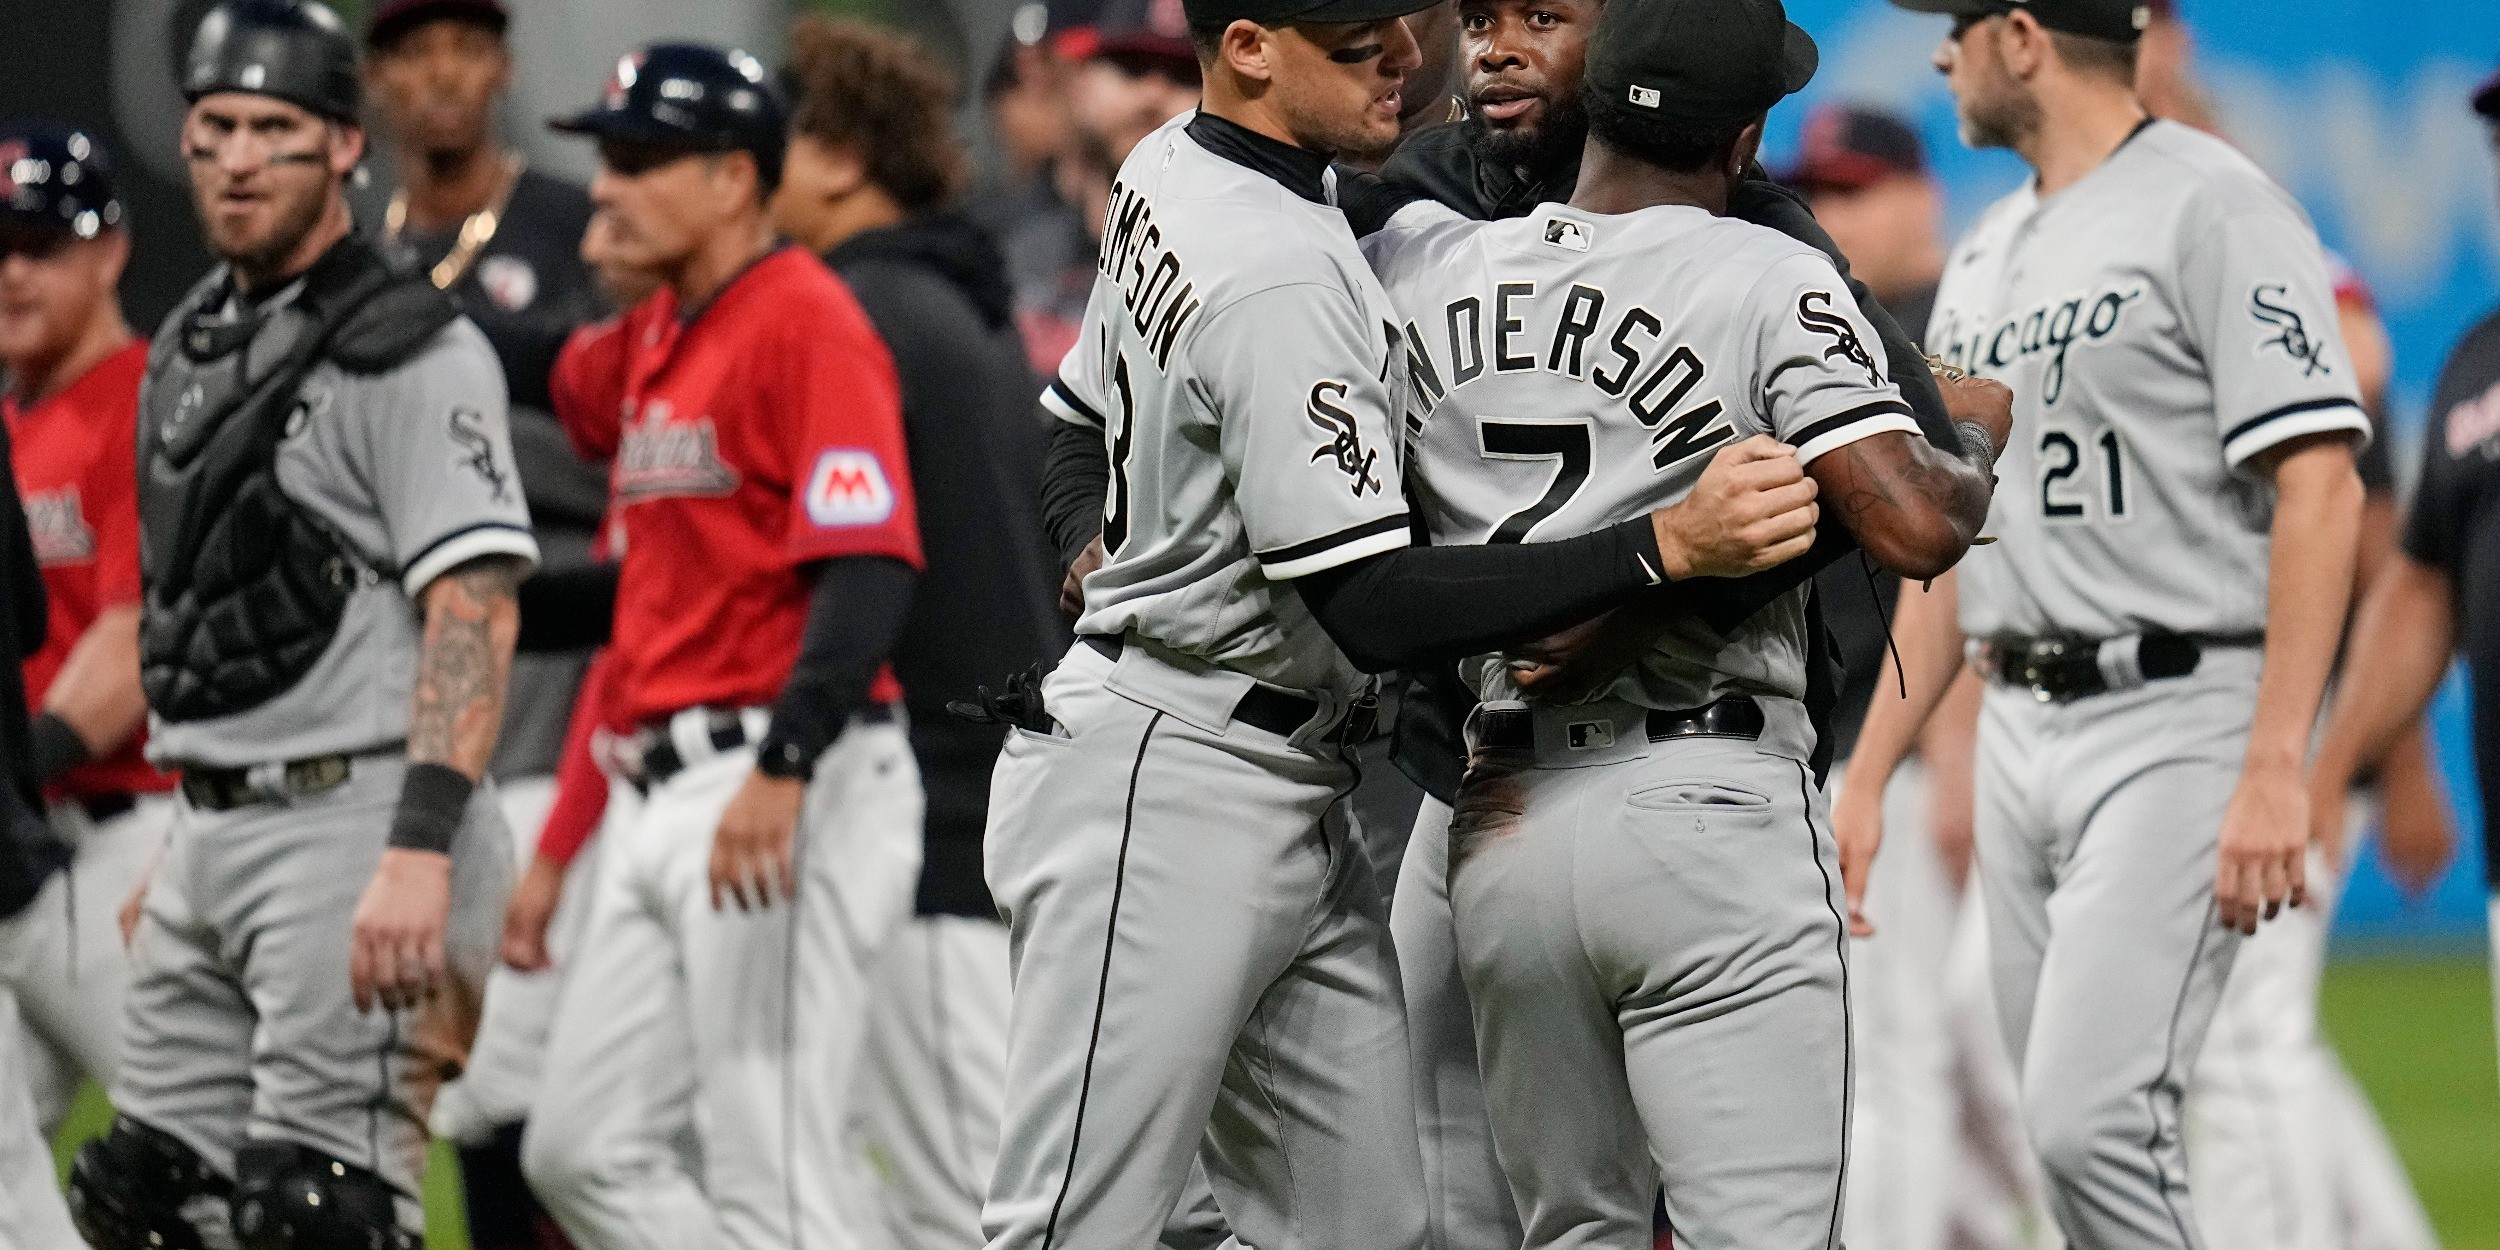 What's going on with the White Sox?